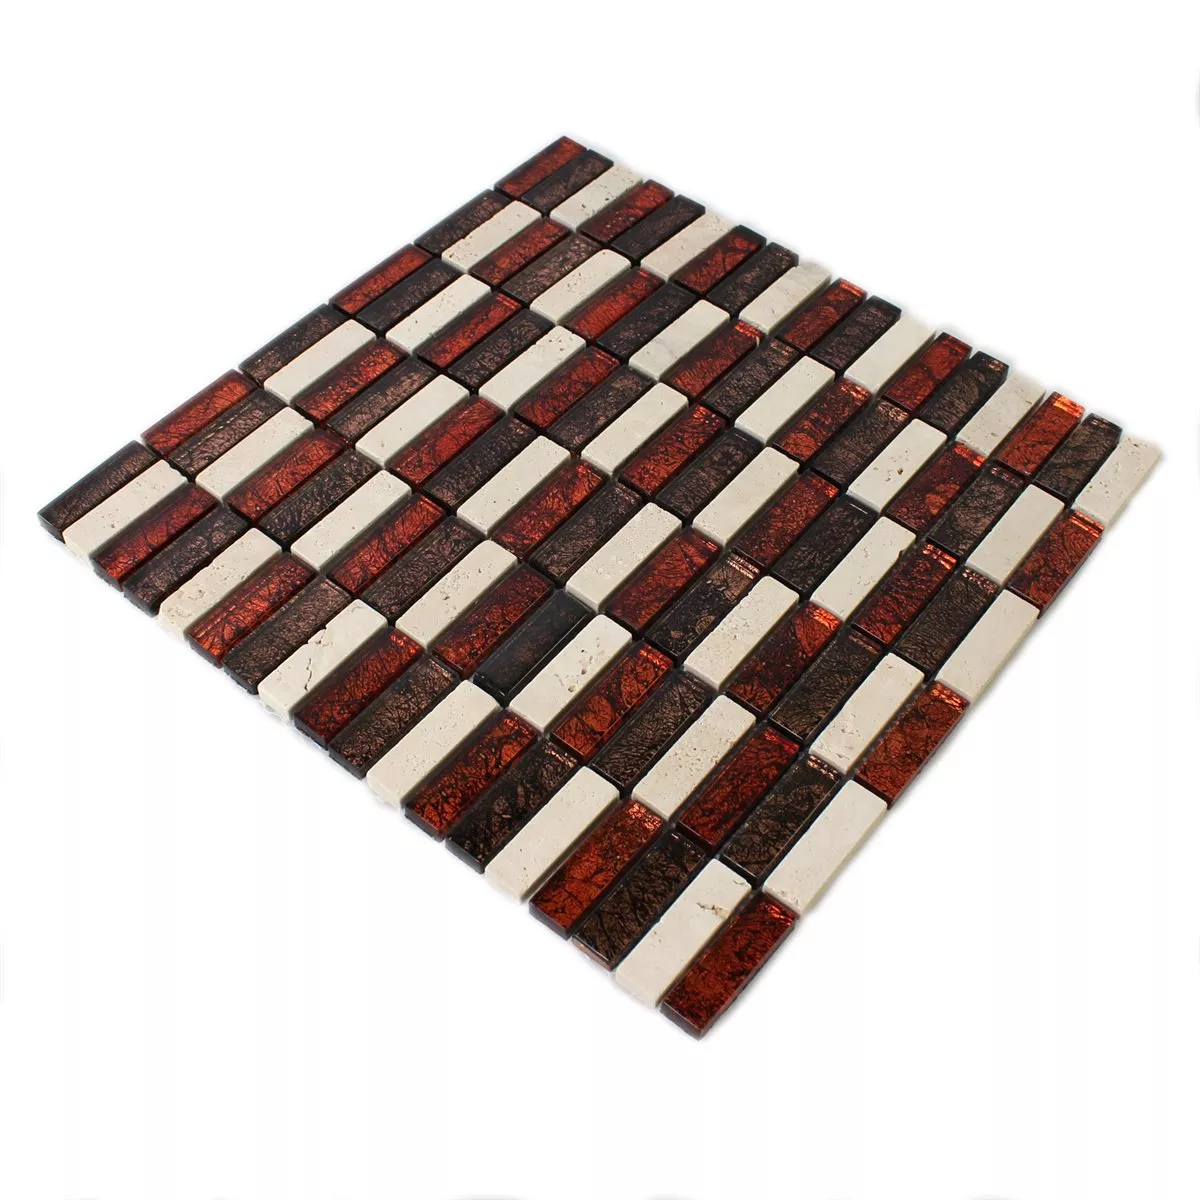 Mosaic Tiles Natural Stone Glass Red Brown Beige Stick